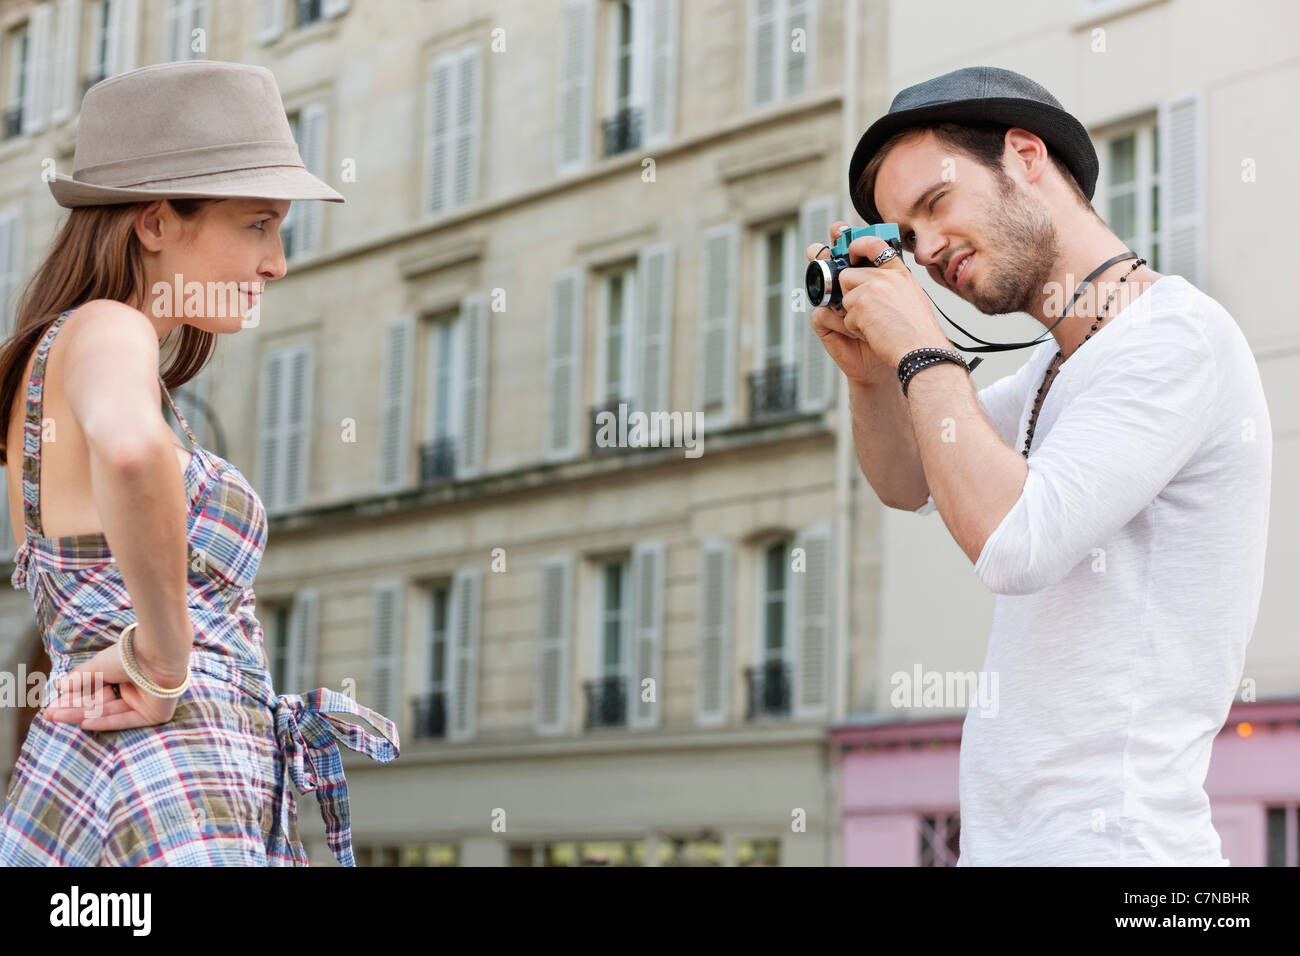 Man taking a picture of a woman standing with her hand on her hip, Paris, Ile-de-France, France Stock Photo